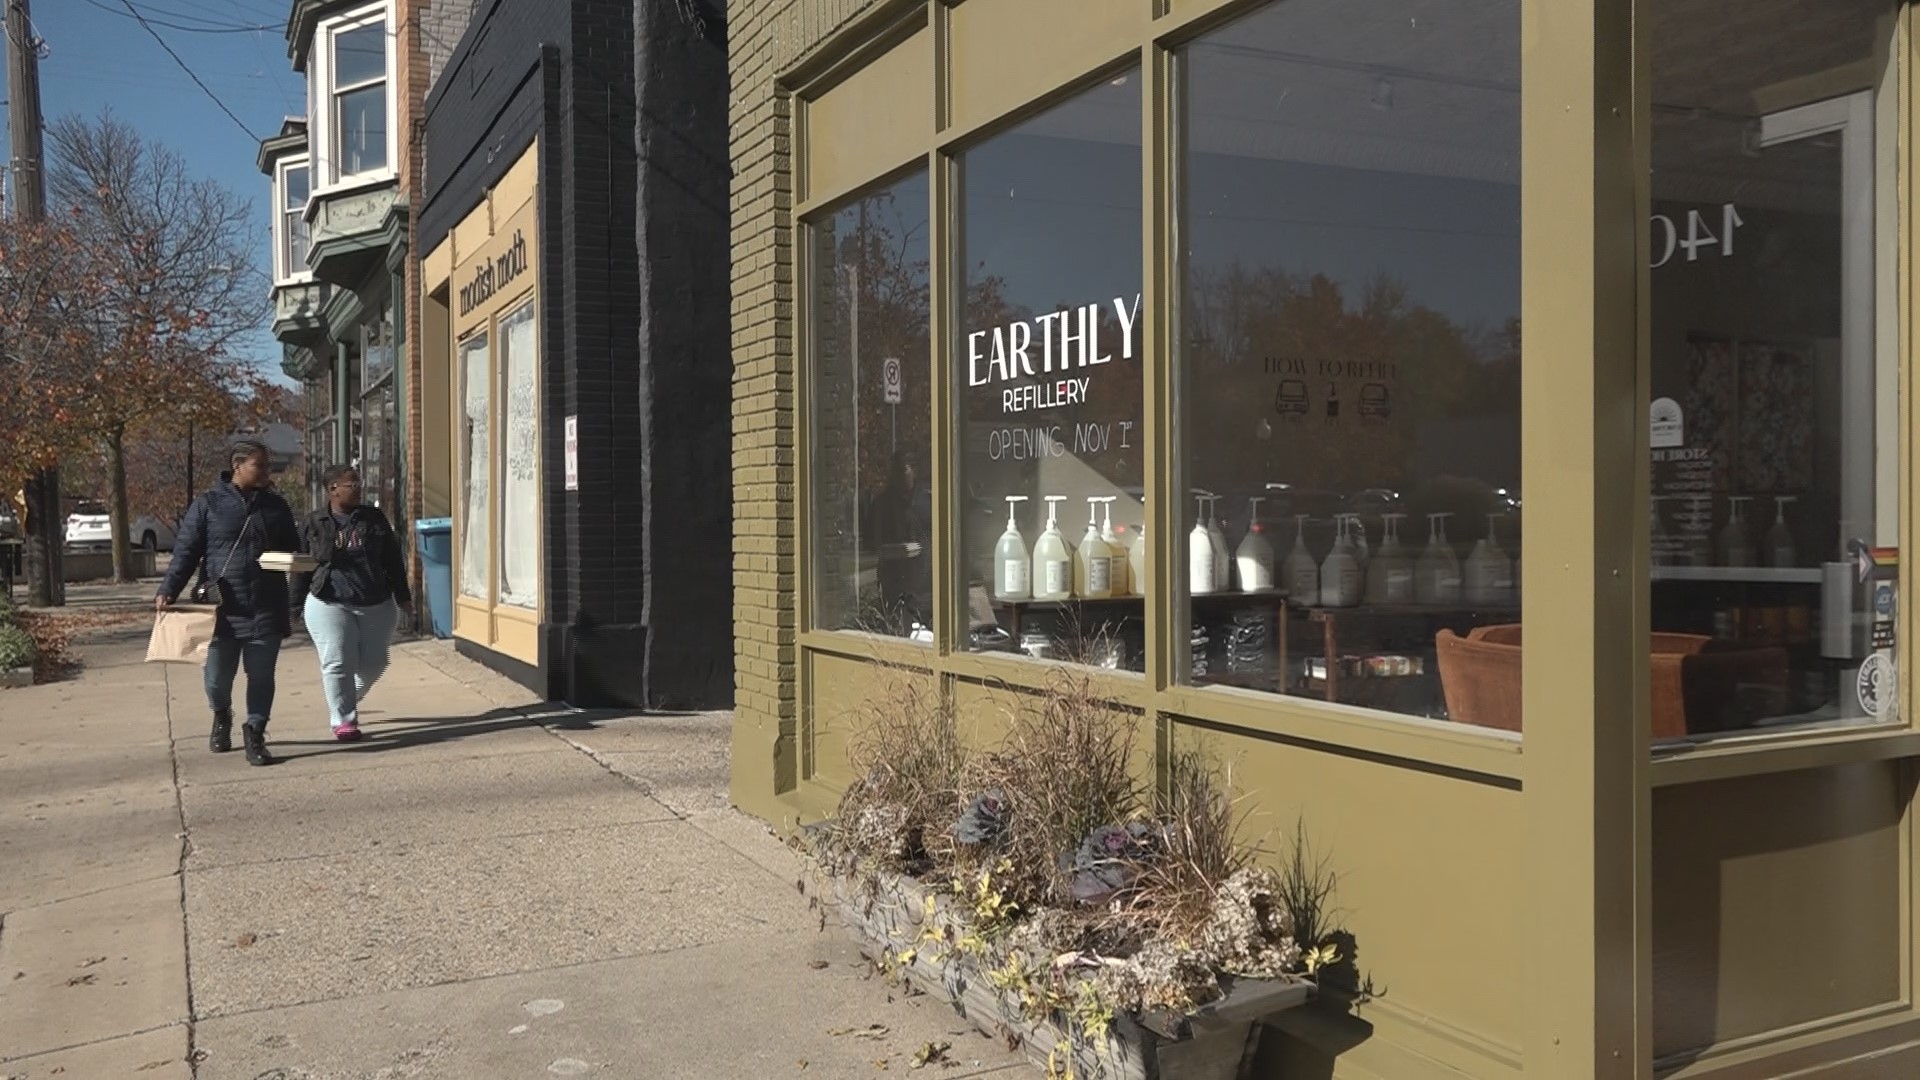 Grand Rapids city officials say for every business that's closed this past year in downtown, two new businesses have opened.